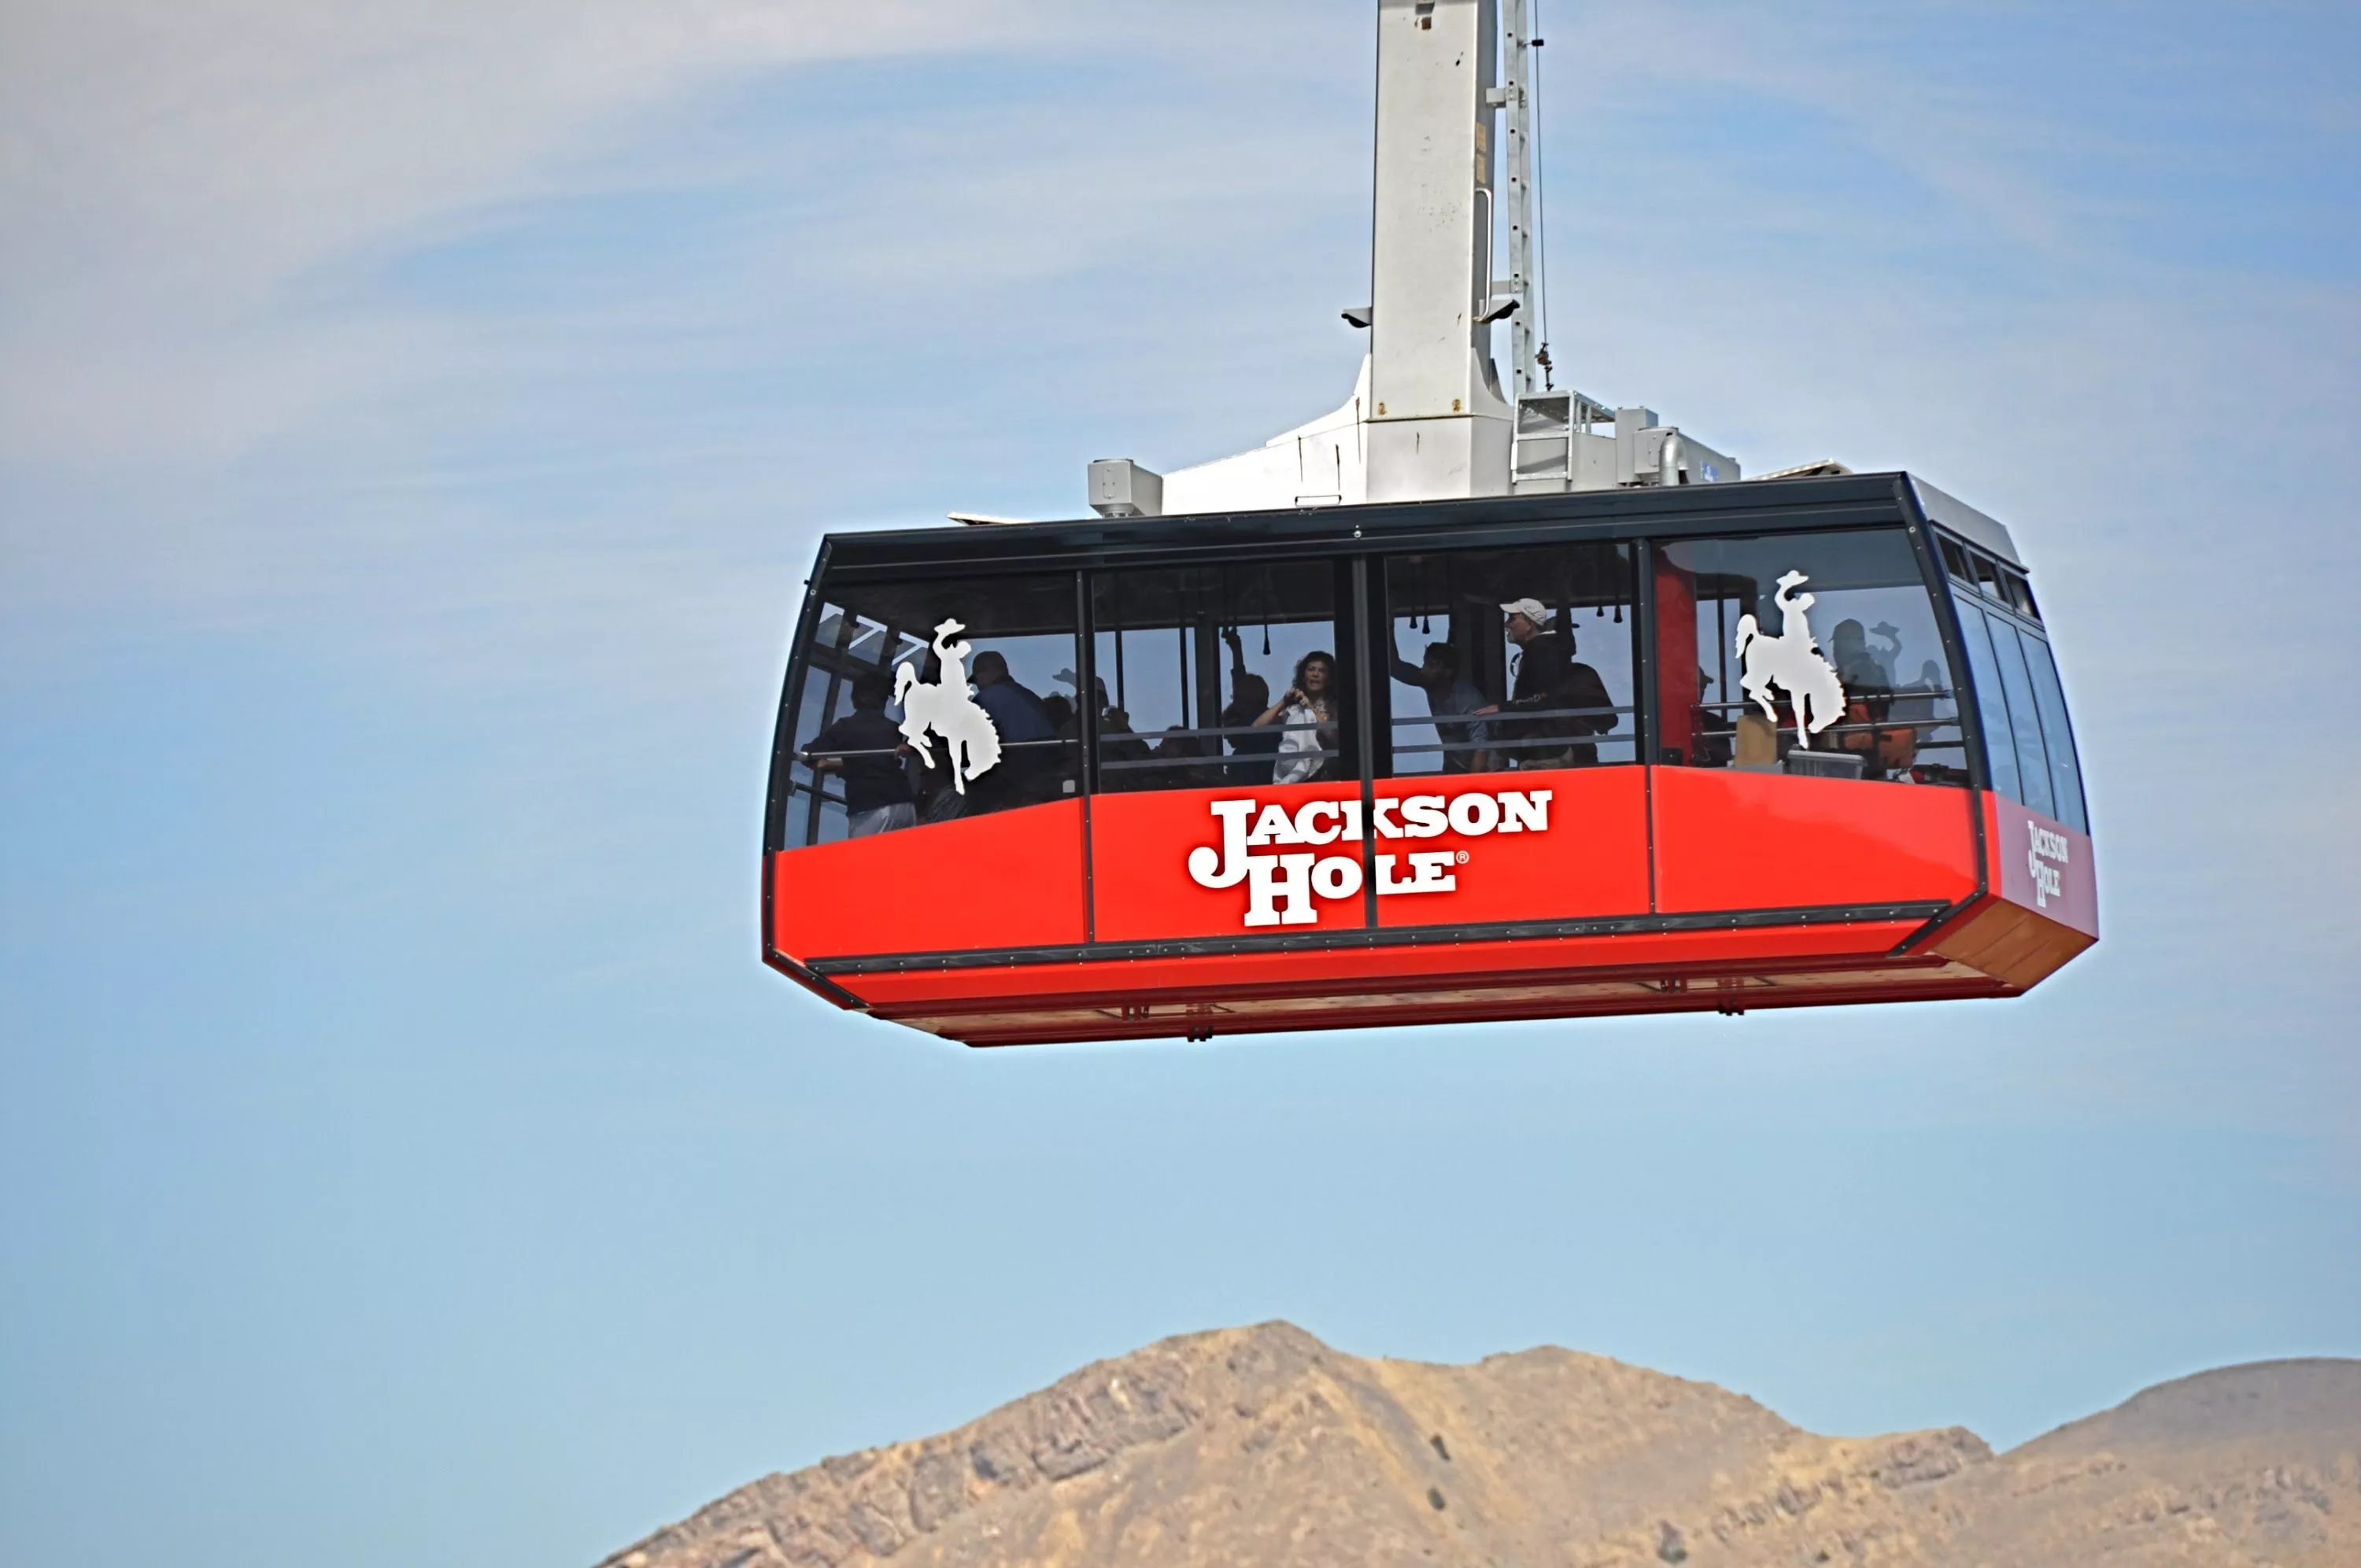 Jackson Hole Aerial Tram and Gondola Rides in USA, North America | Cable Cars - Rated 3.9